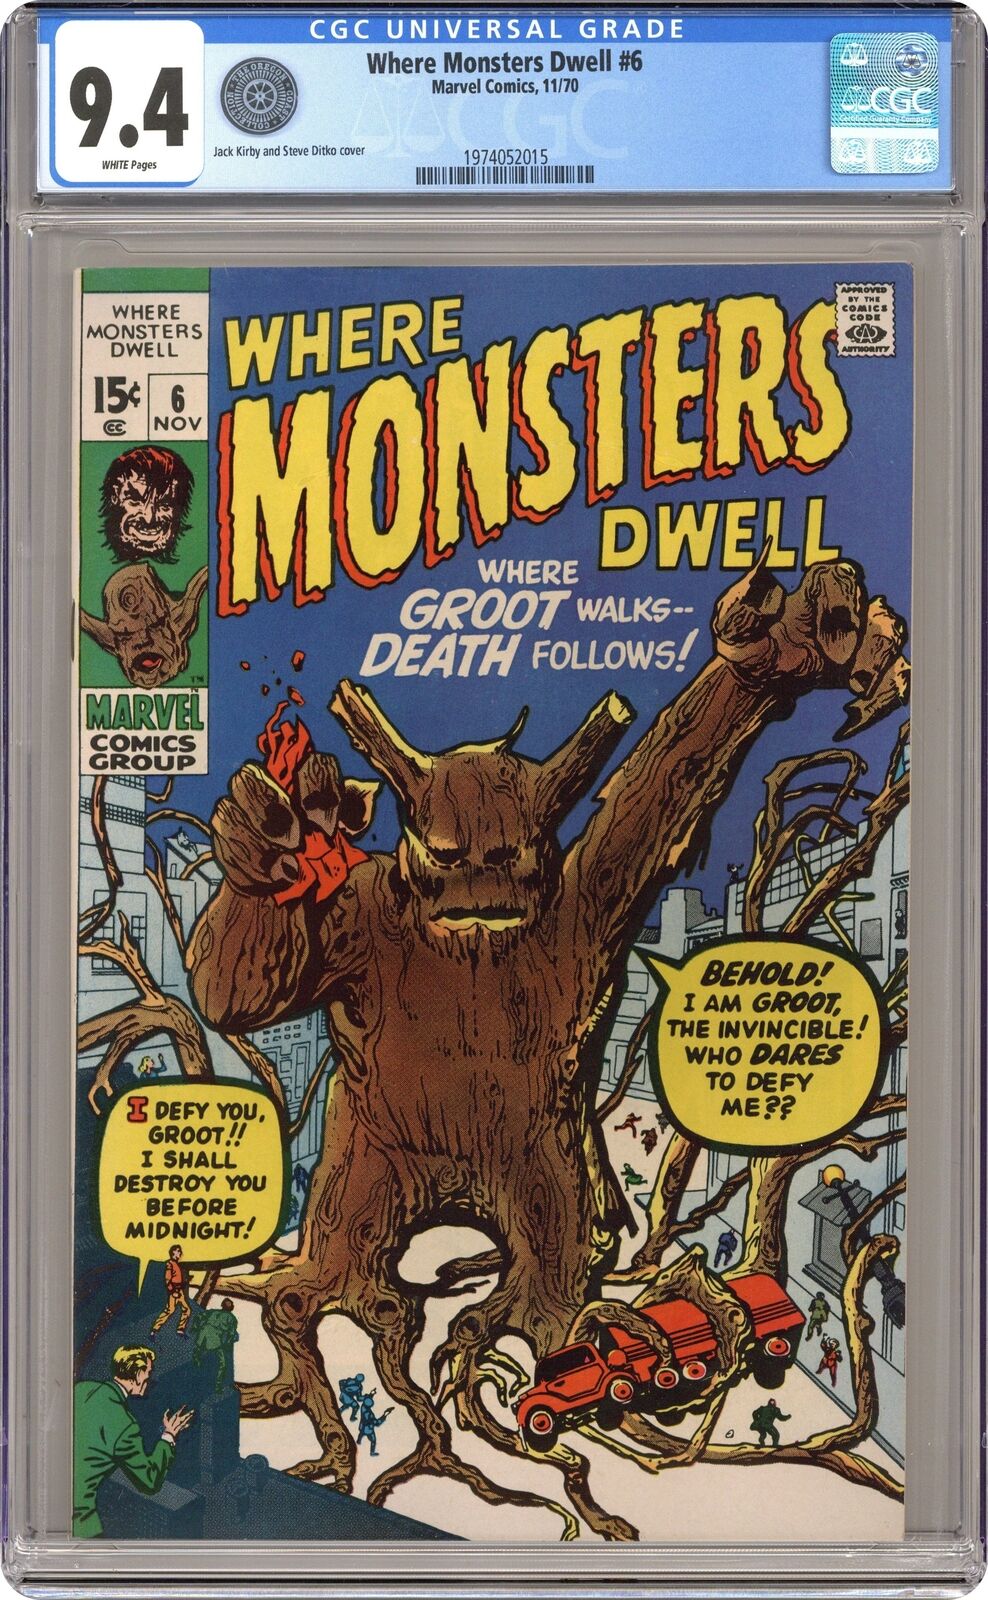 Where Monsters Dwell #6 CGC 9.4 1970 1974052015